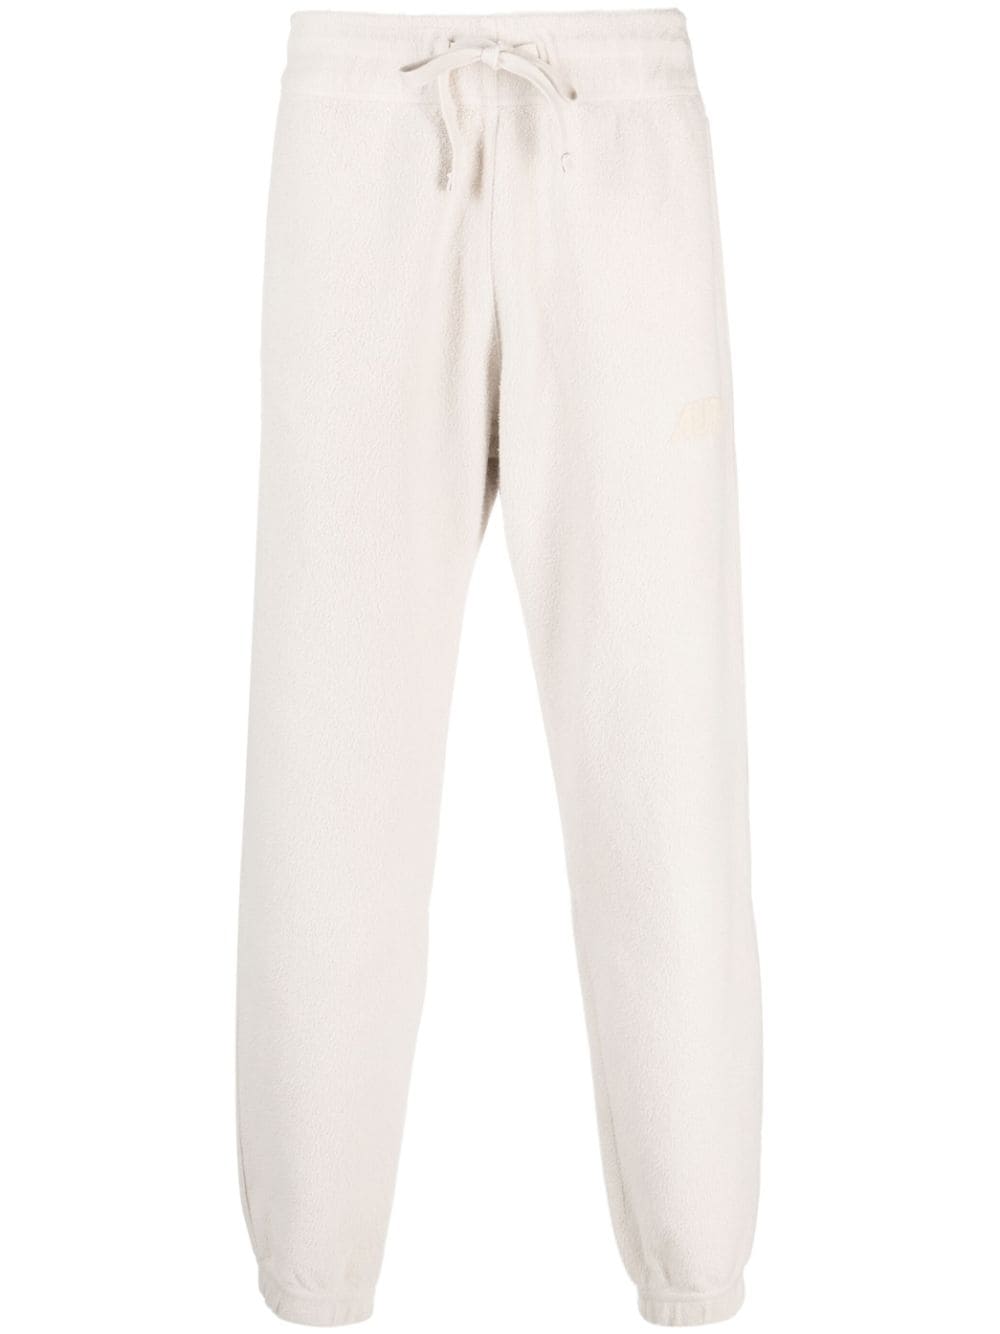 brushed-effect cotton track pant